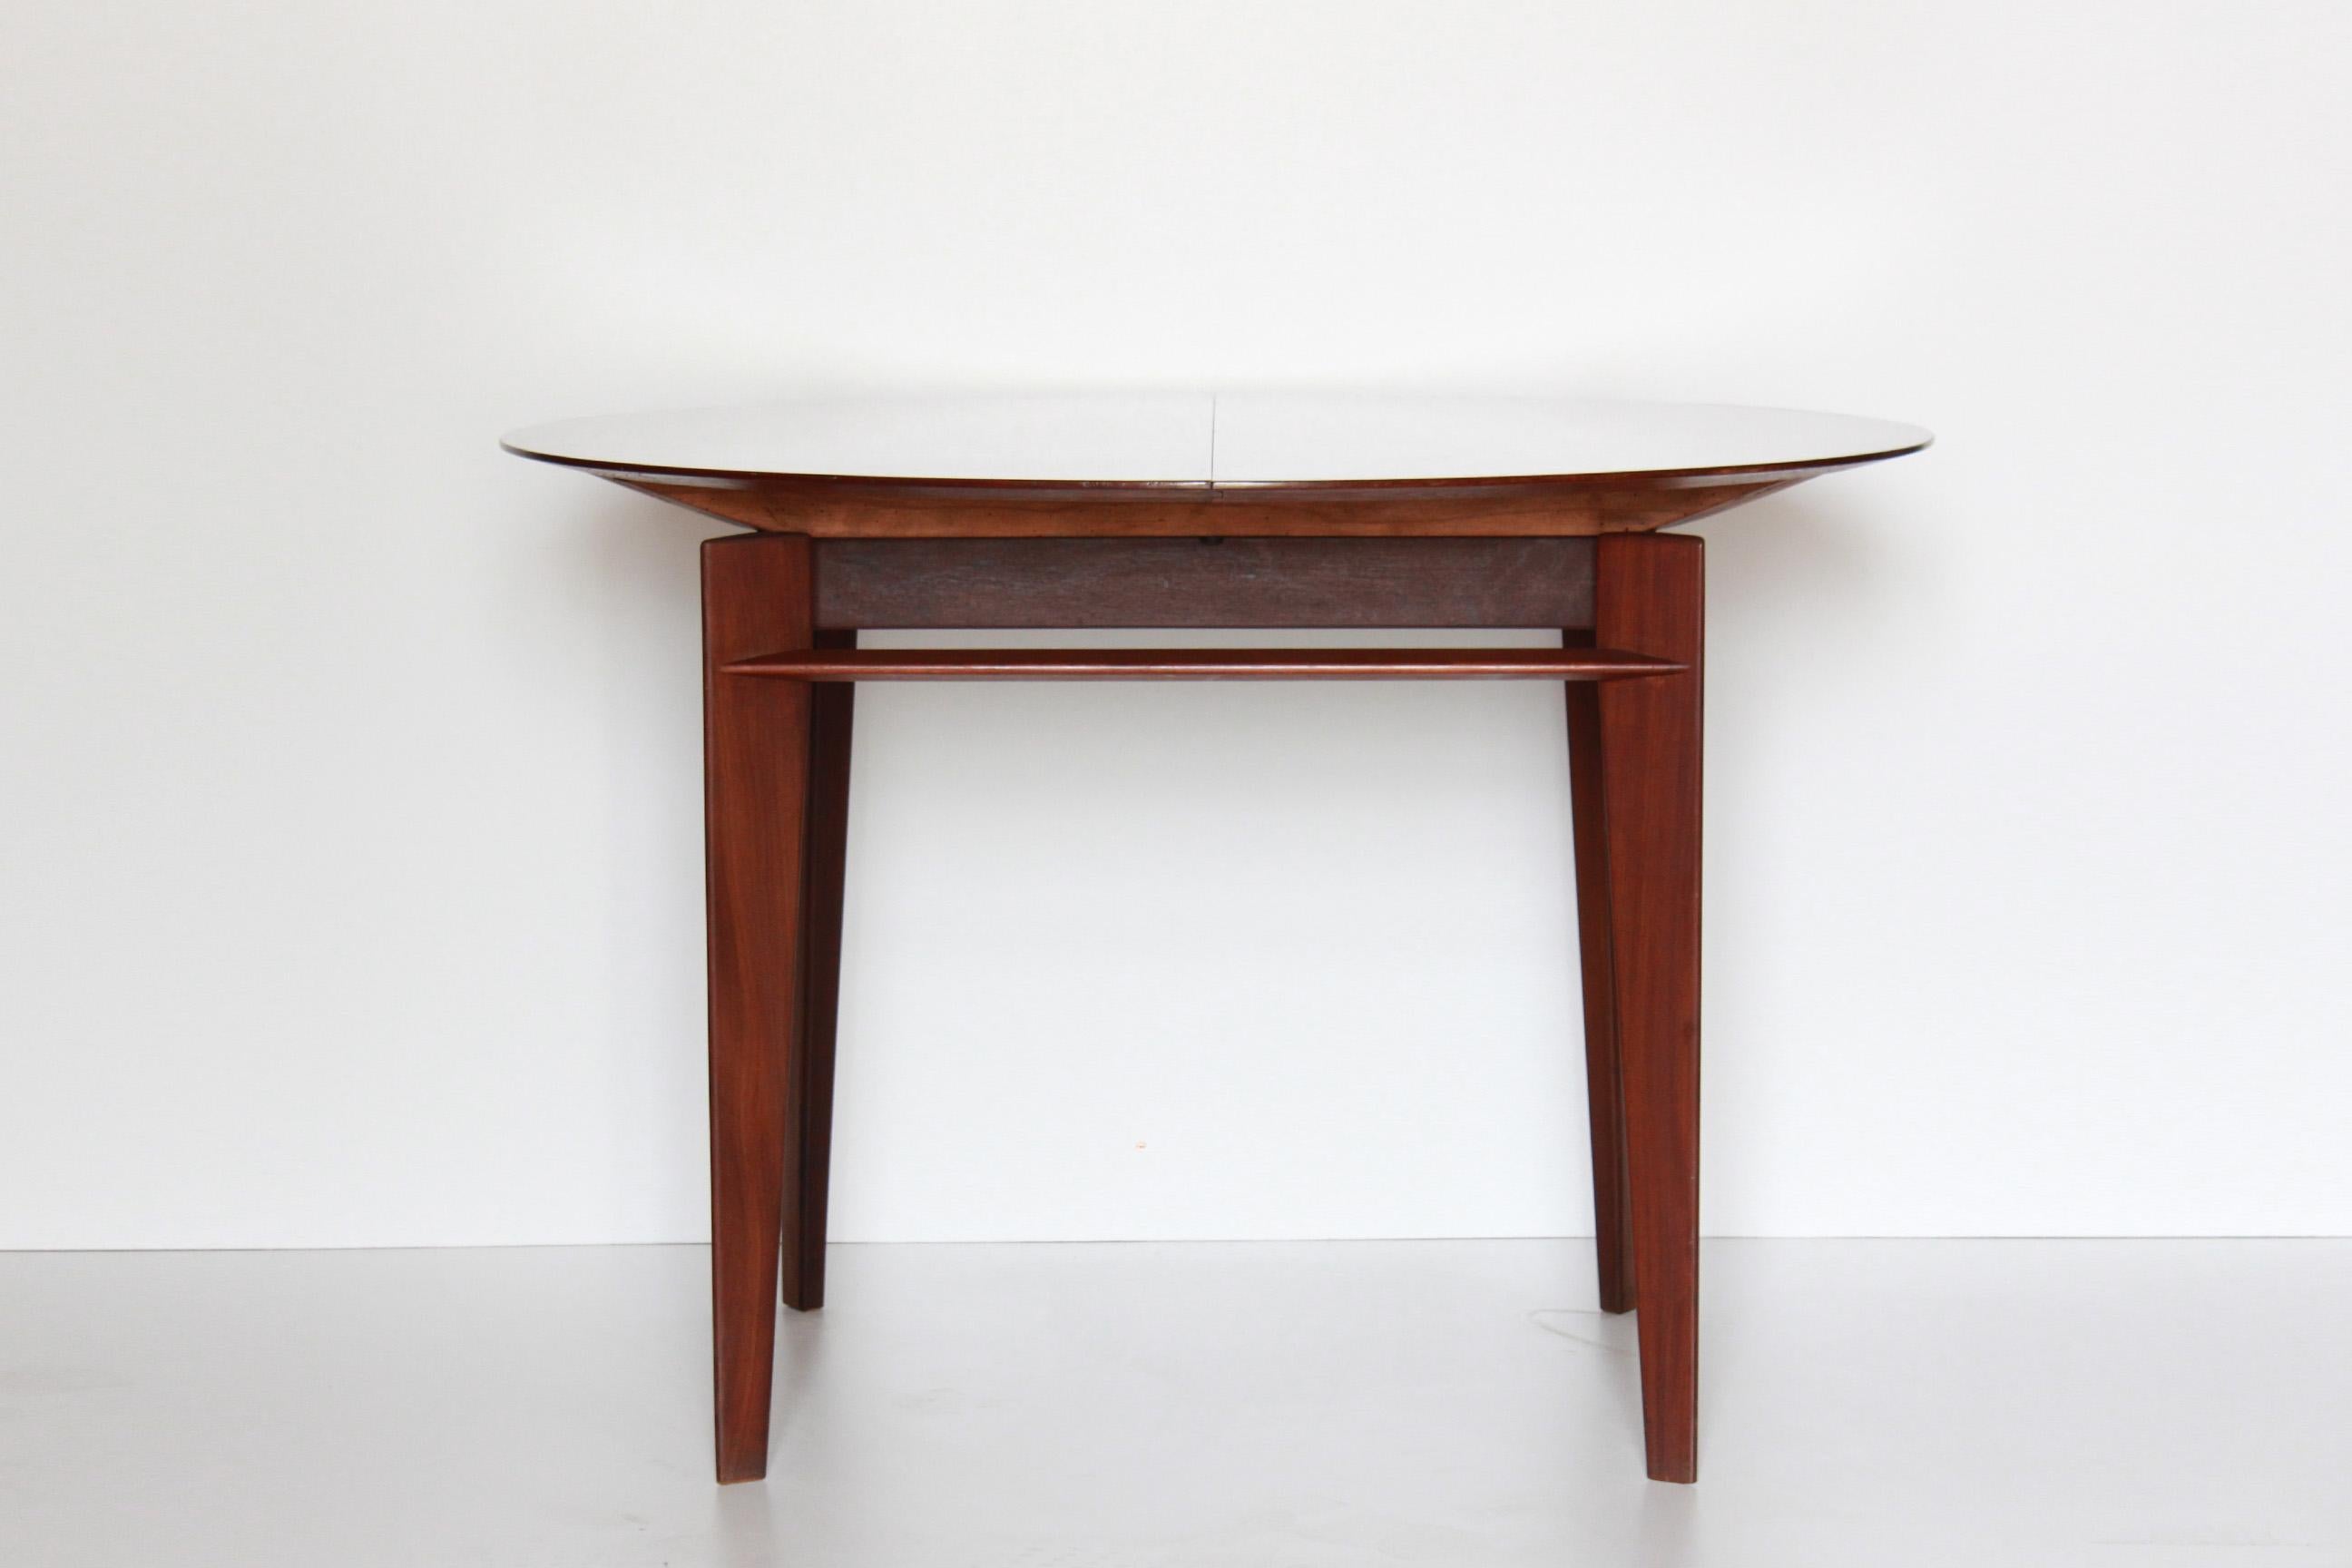 A rare round shaped 1950s vintage design dining table set in solid teak wood designed and manufactured by iconic italian Vittorio Dassi company.

Table: Extendible structure thanks to two extra panels, the table has a polished teak top and